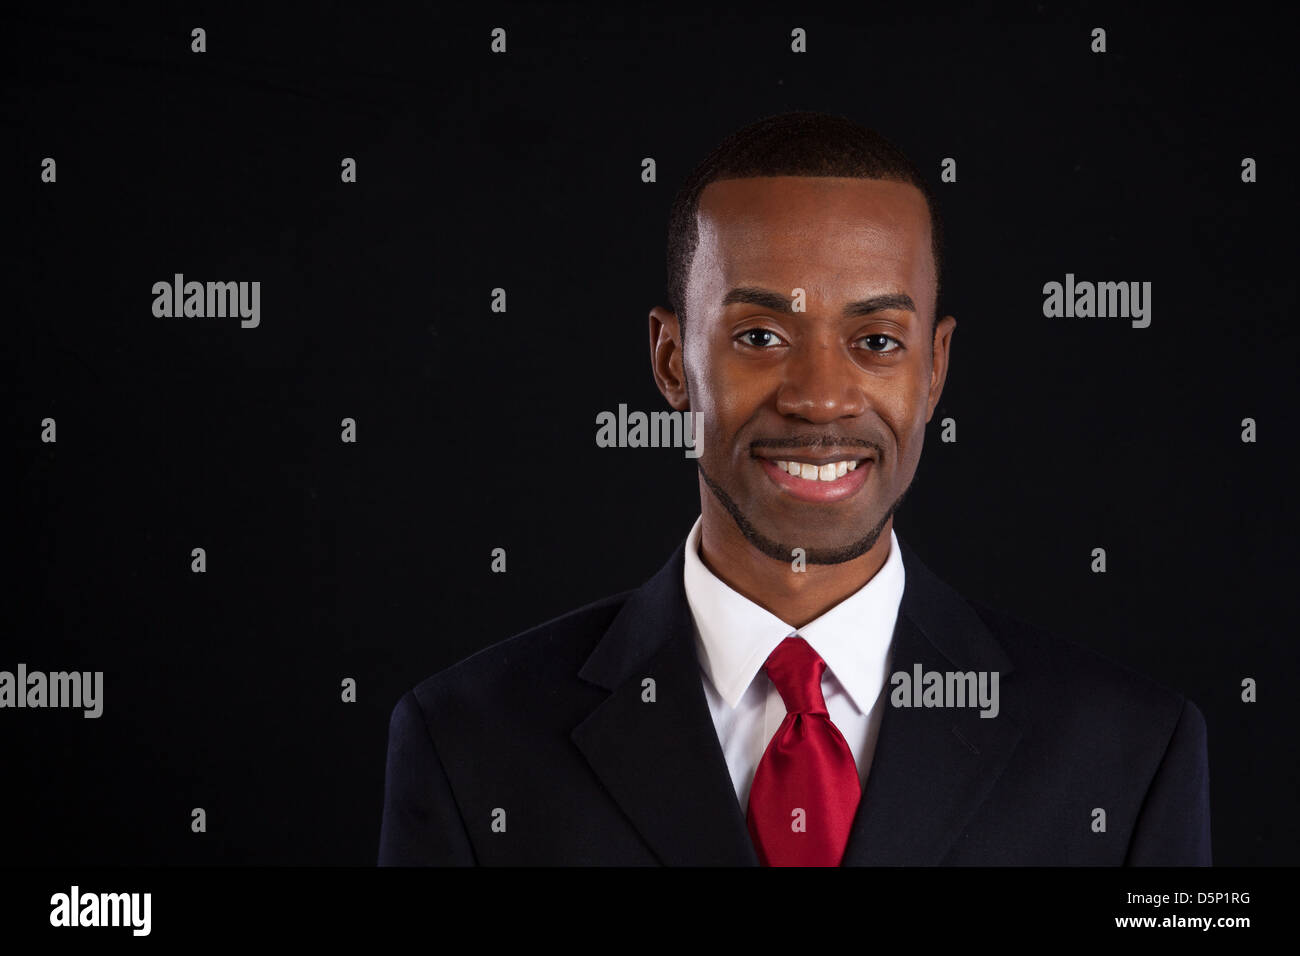 Black man in dark suit, white shirt and red tie, a successful, prosperous businessman, looking thoughtful and happy Stock Photo